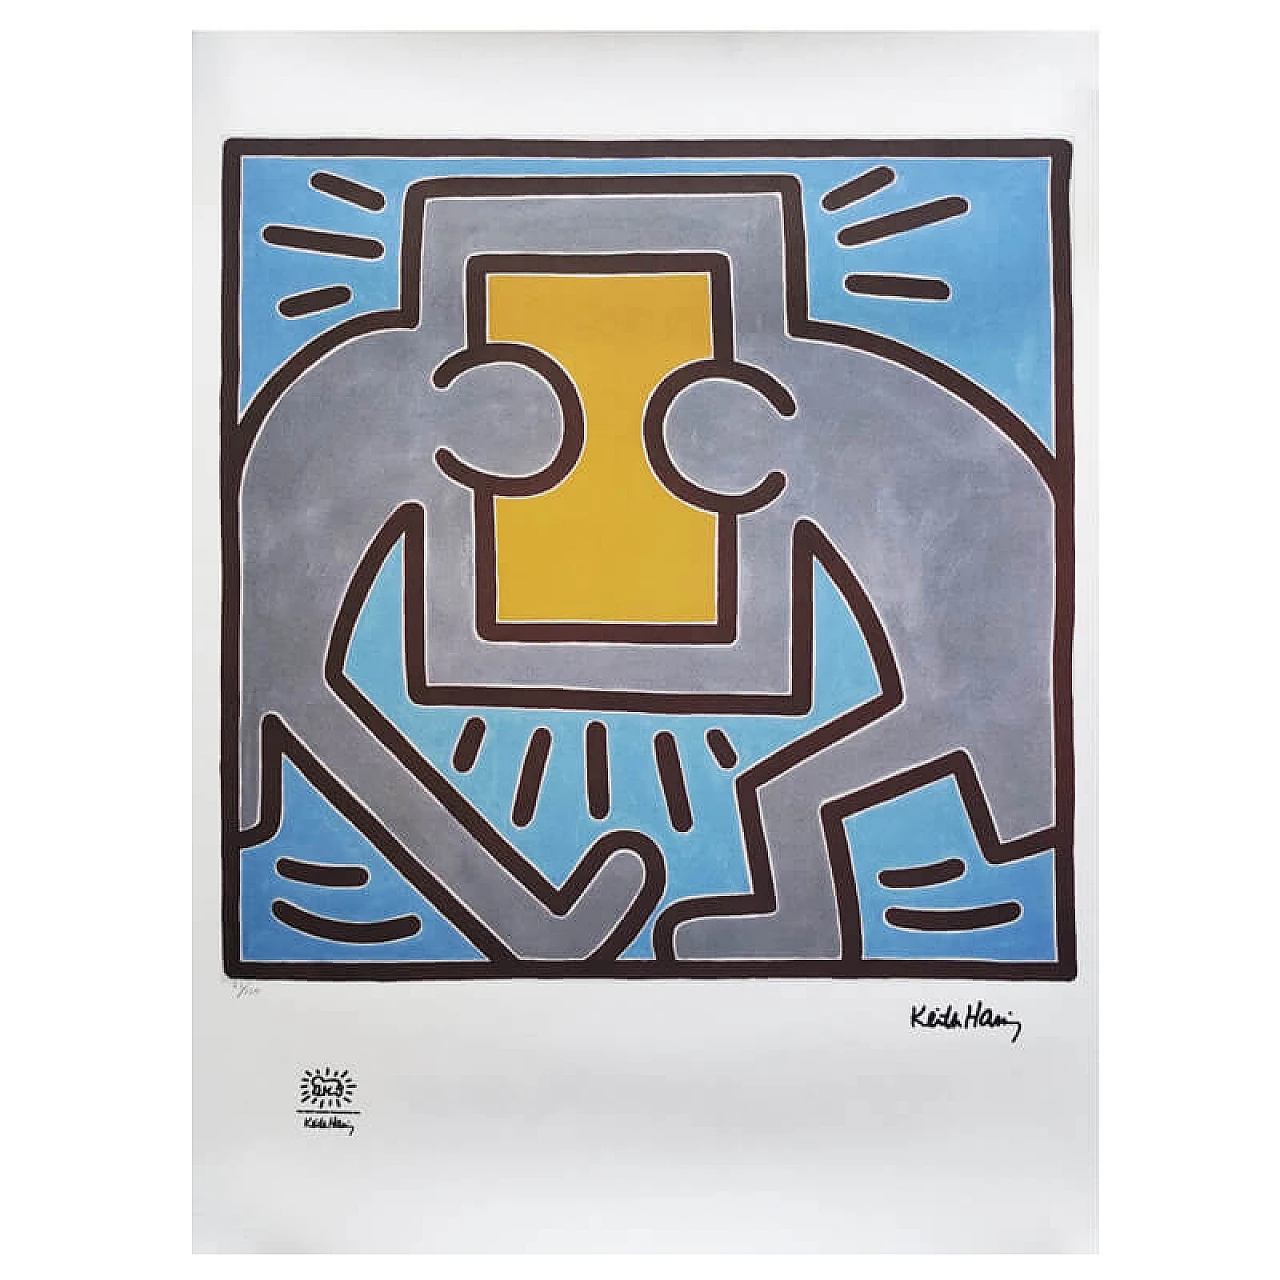 Original limited edition lithograph by Keith Haring, 1990s 1